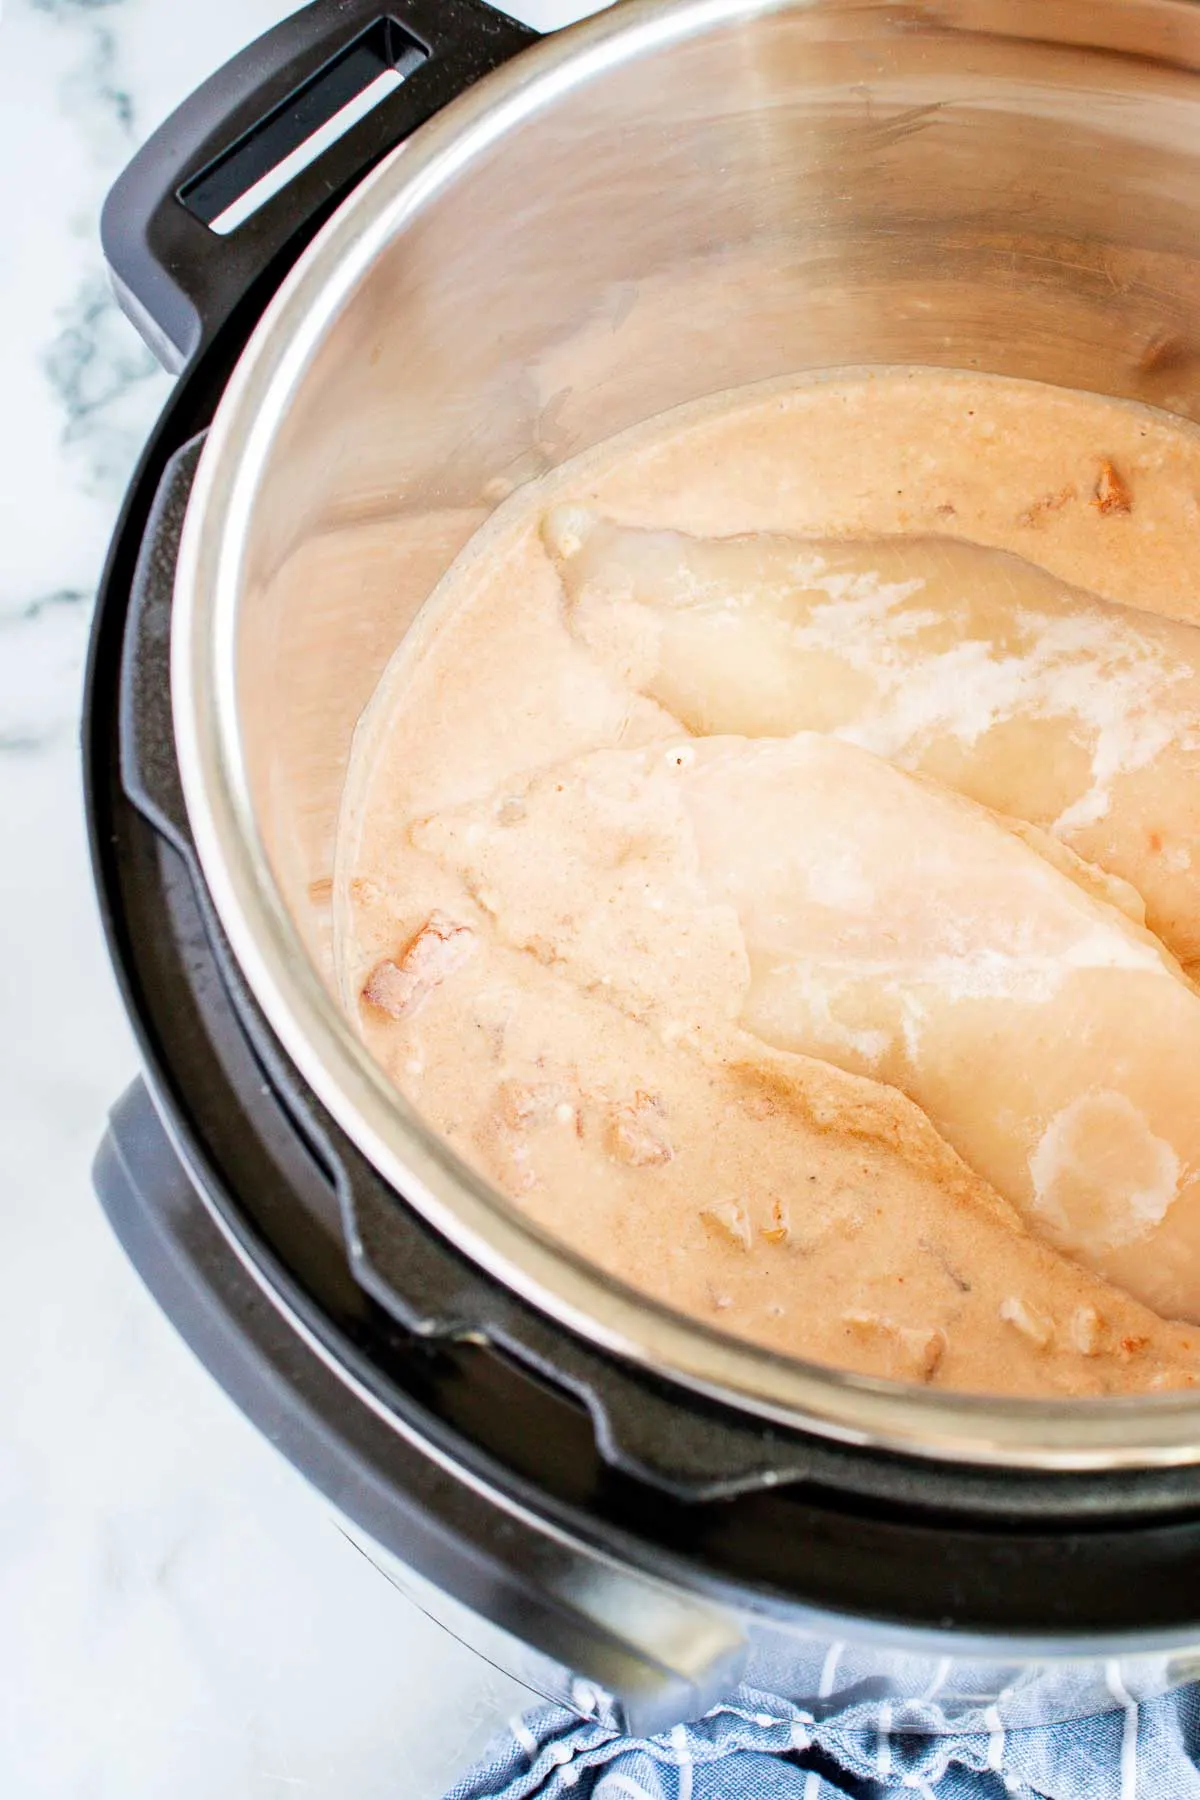 Add the chicken to the Instant Pot full of coconut milk sauce.